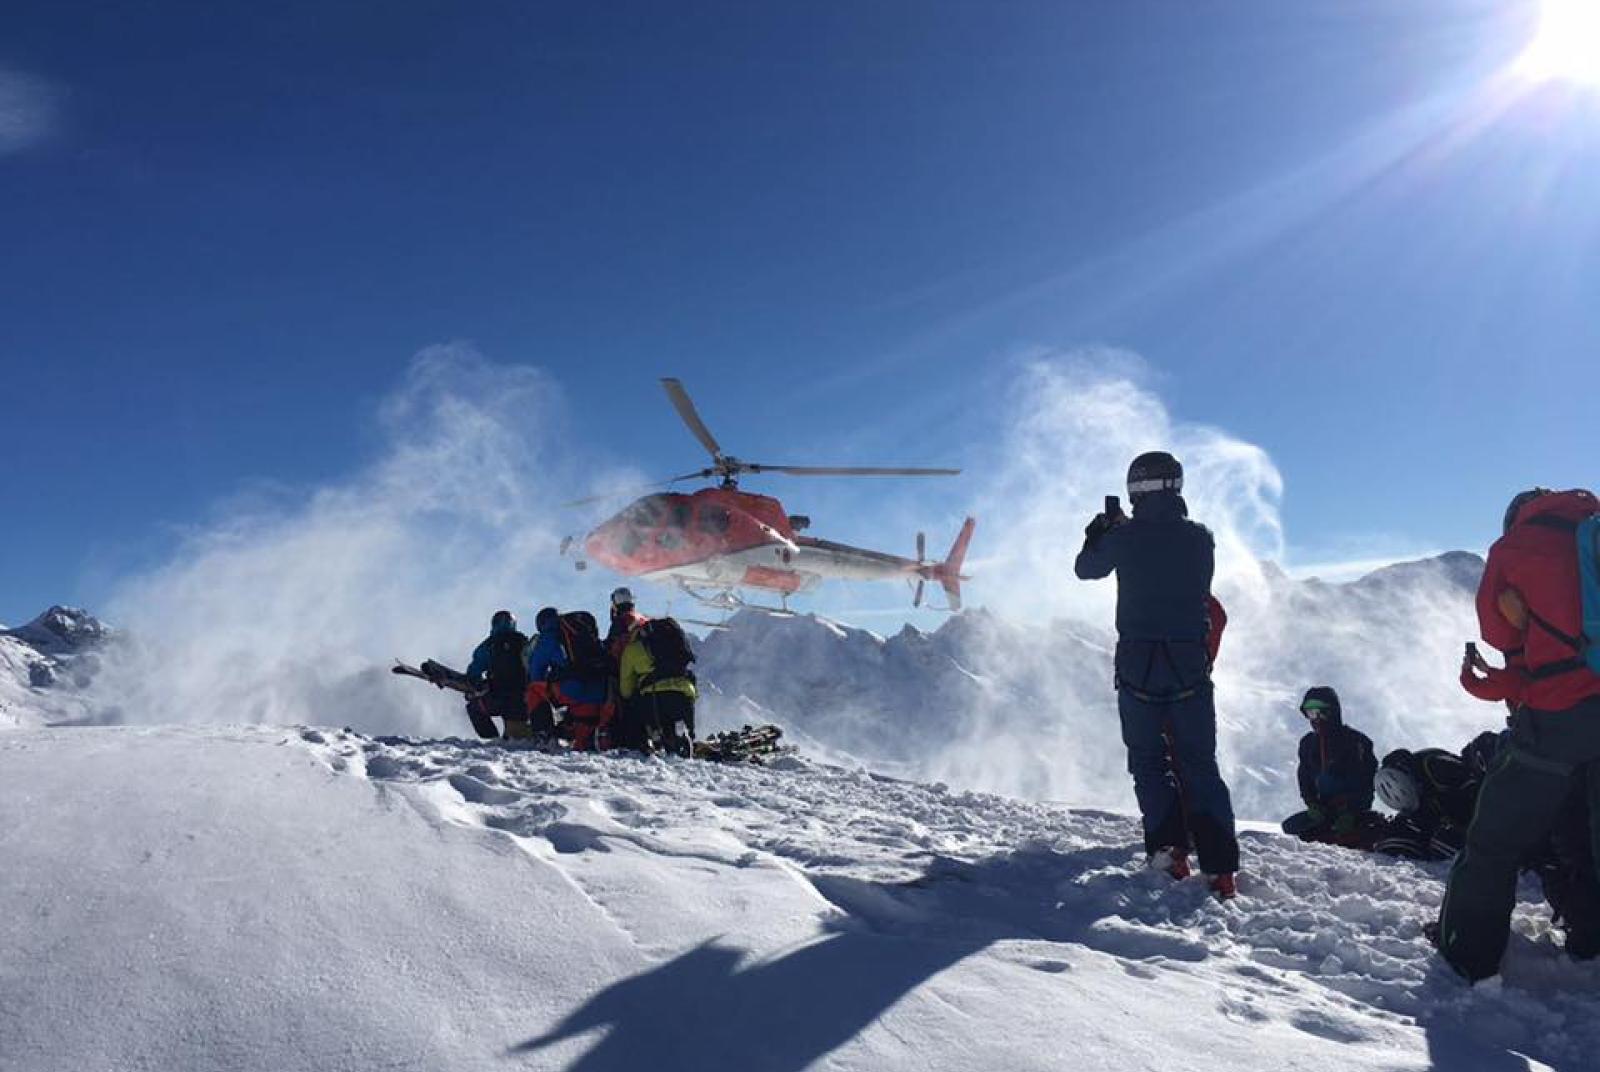 HELI-SKIING DAY WITH MONTEROSA EXPERIENCE